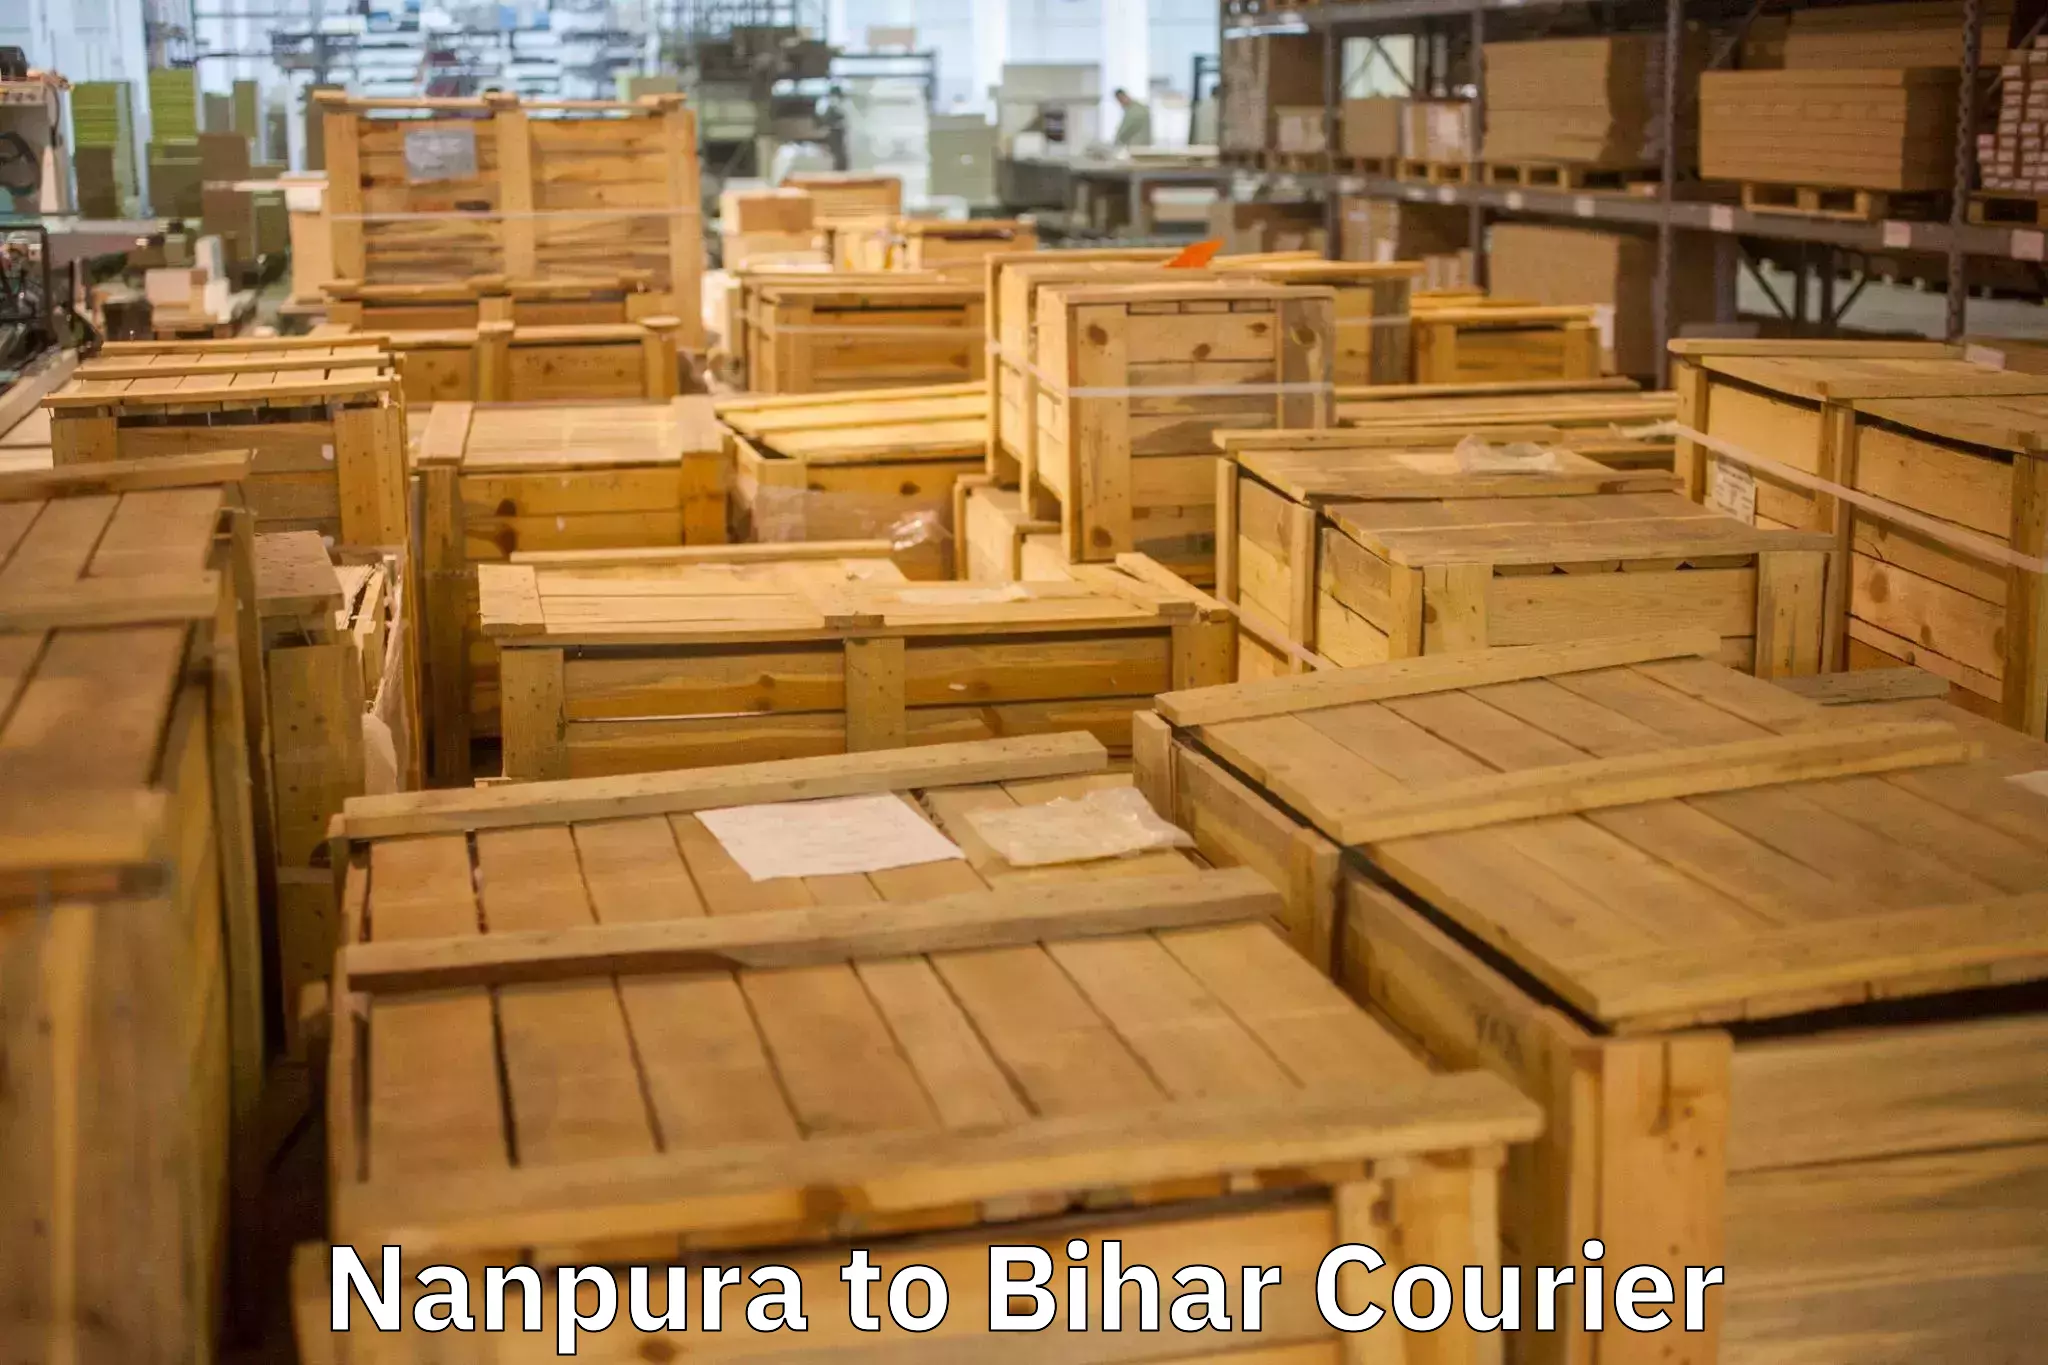 Professional relocation services in Nanpura to Bihar